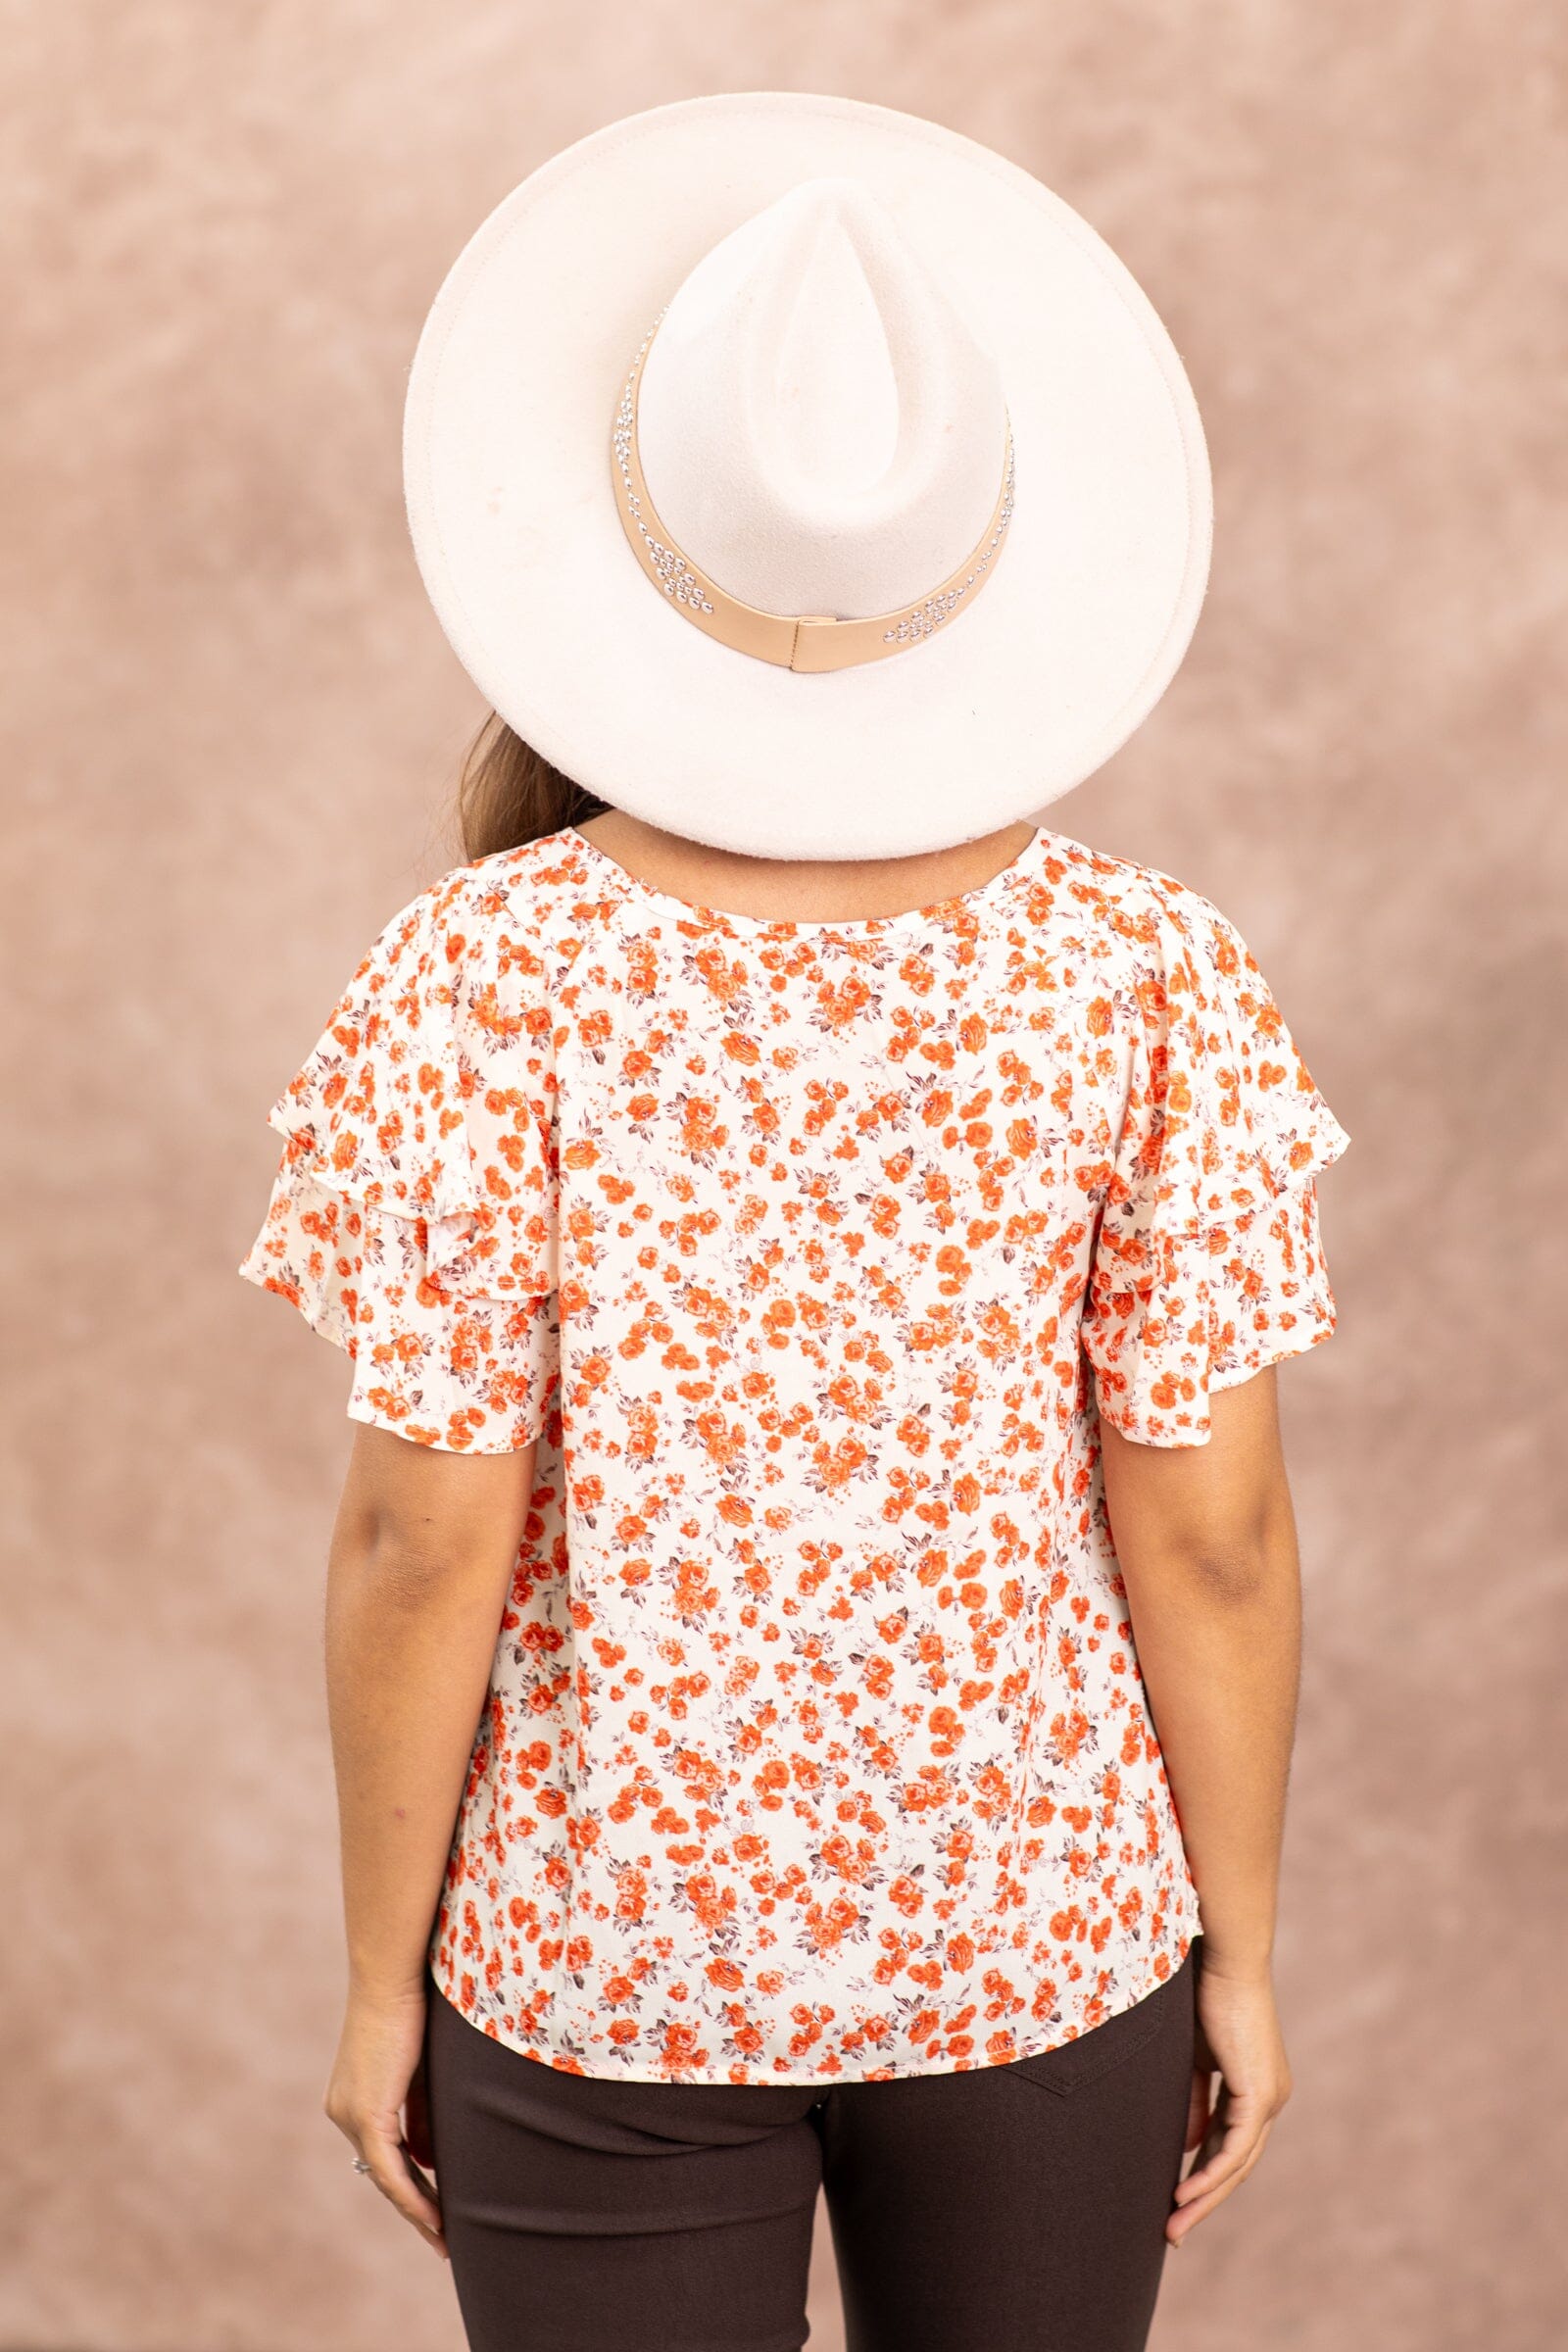 Orange Floral Double Flutter Sleeve Top - Filly Flair